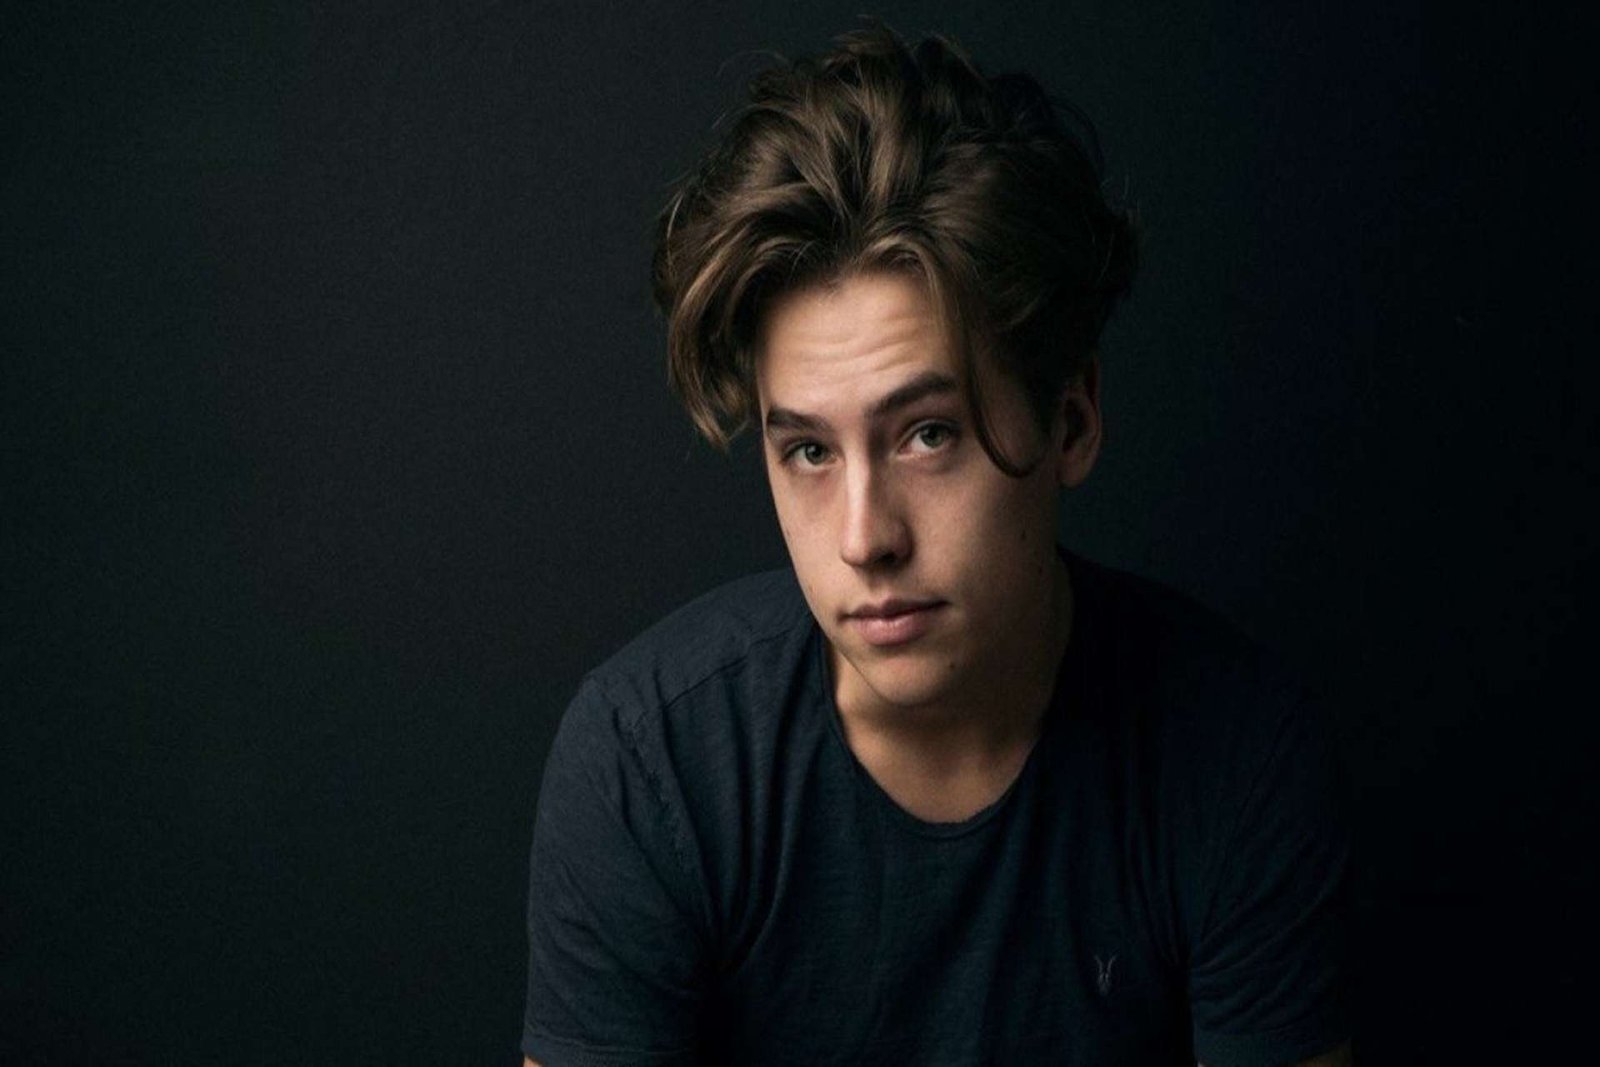 Cole Sprouse Reflects on ‘The Suite Life’ Memories, Discusses Future Projects